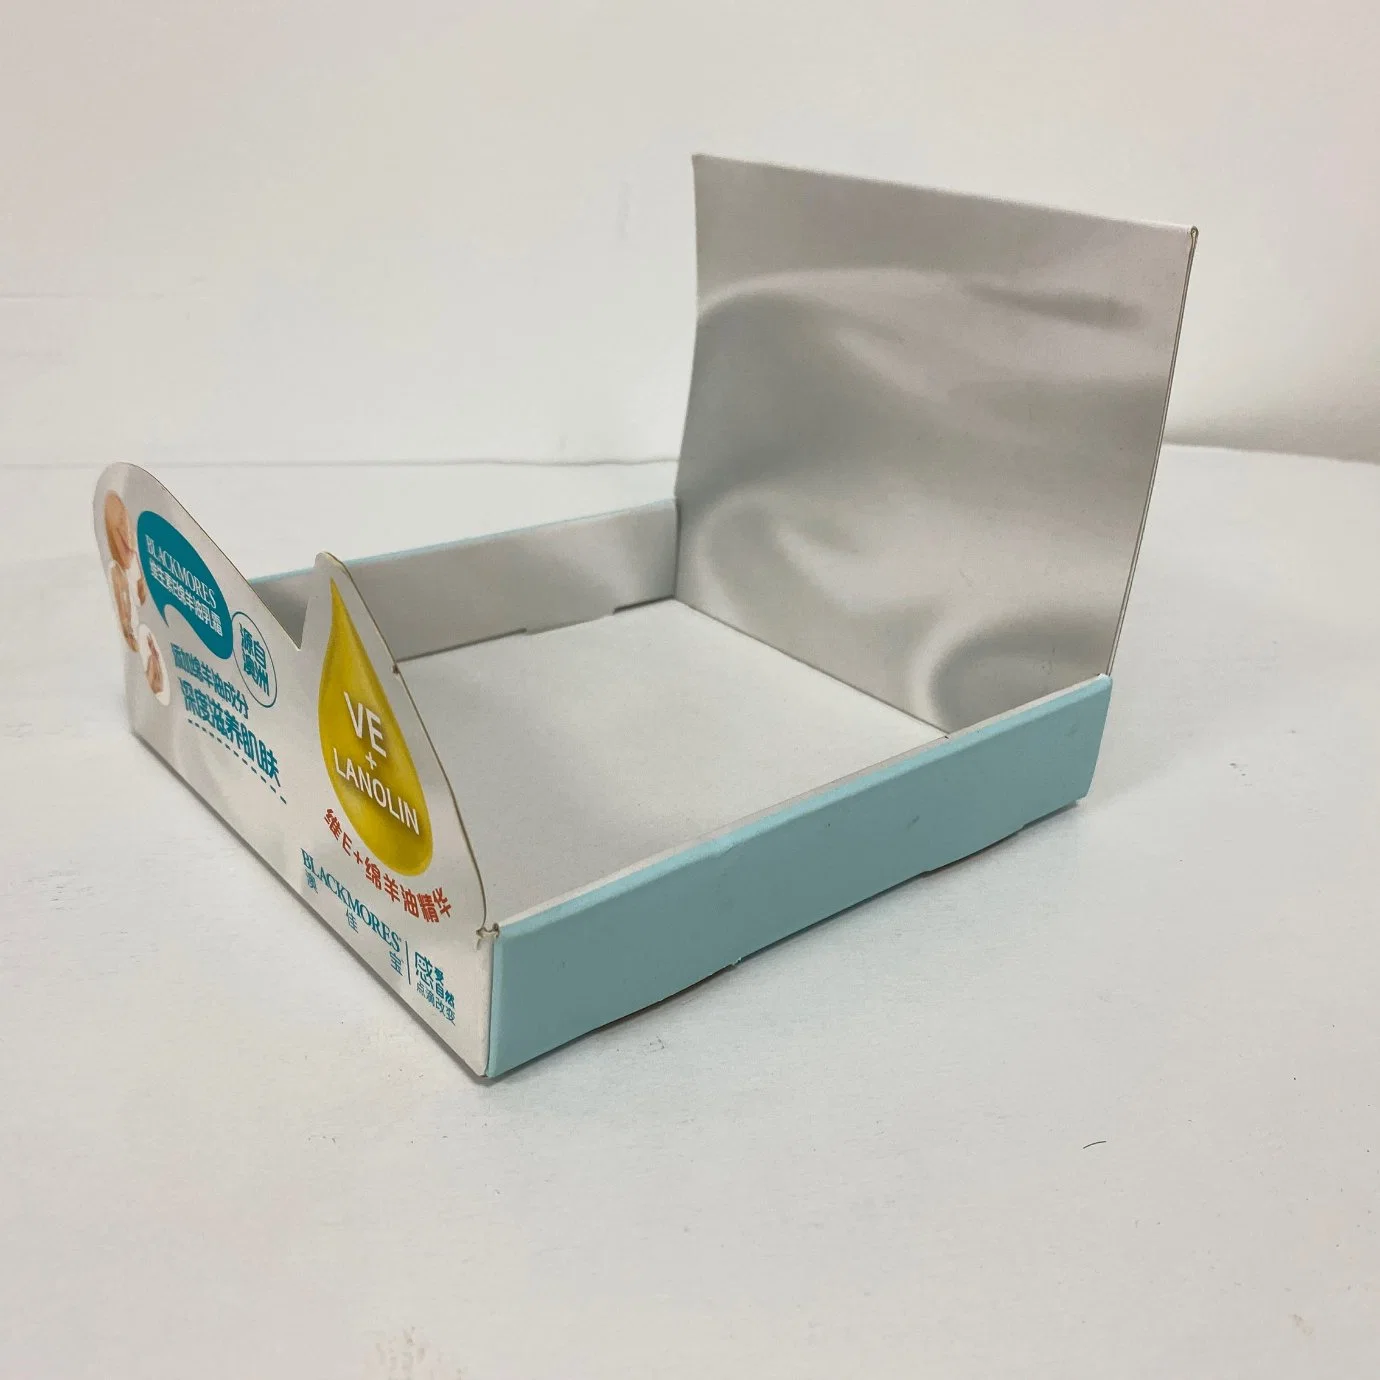 Vivid Promotional Cardboard Display Case Packaging Shipping Display Boxes